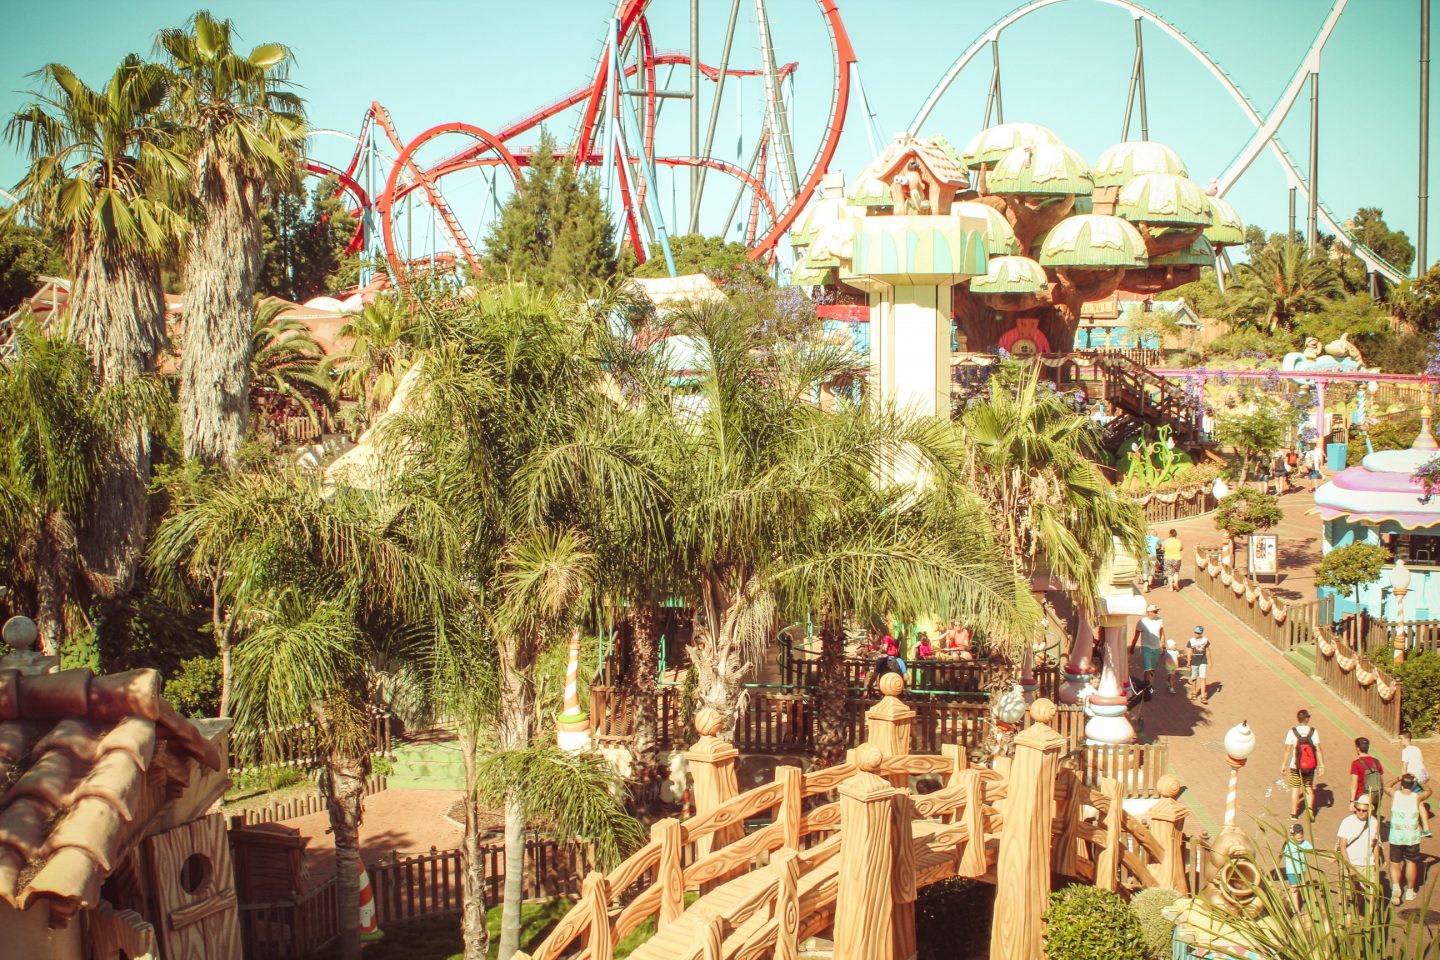 PortAventura - in search of adventures with kids.